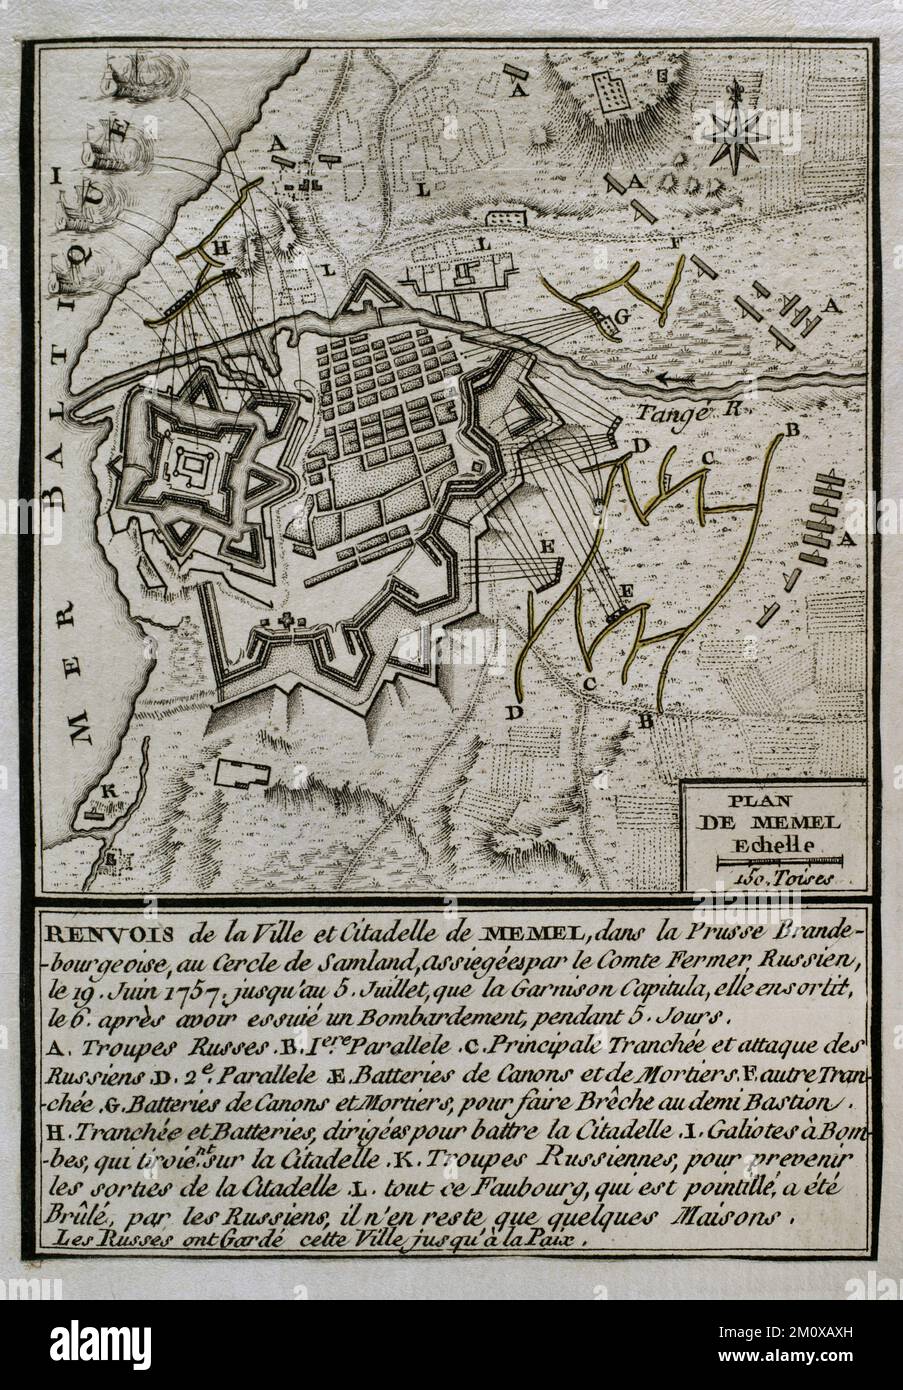 Seven Years War (1756-1763). Map of the Russian bombardment of Memel, 1757. On June 19, 1757 the Russian army, commanded by Field Marshal Stepan Fyodorovich Apraksin, besieged the town to seize one of the most strongest fortresses in Prussia. After five days of severe artillery fire, Russian troops succeeded in their assault. The garrison capitulated on 6 July and and was taken by the Russians for the rest of the war. Memel was used by the Russians as a base from which to invade East Prussia. Published in 1765 by the cartographer Jean de Beaurain (1696-1771) as an illustration of his Great Map Stock Photo